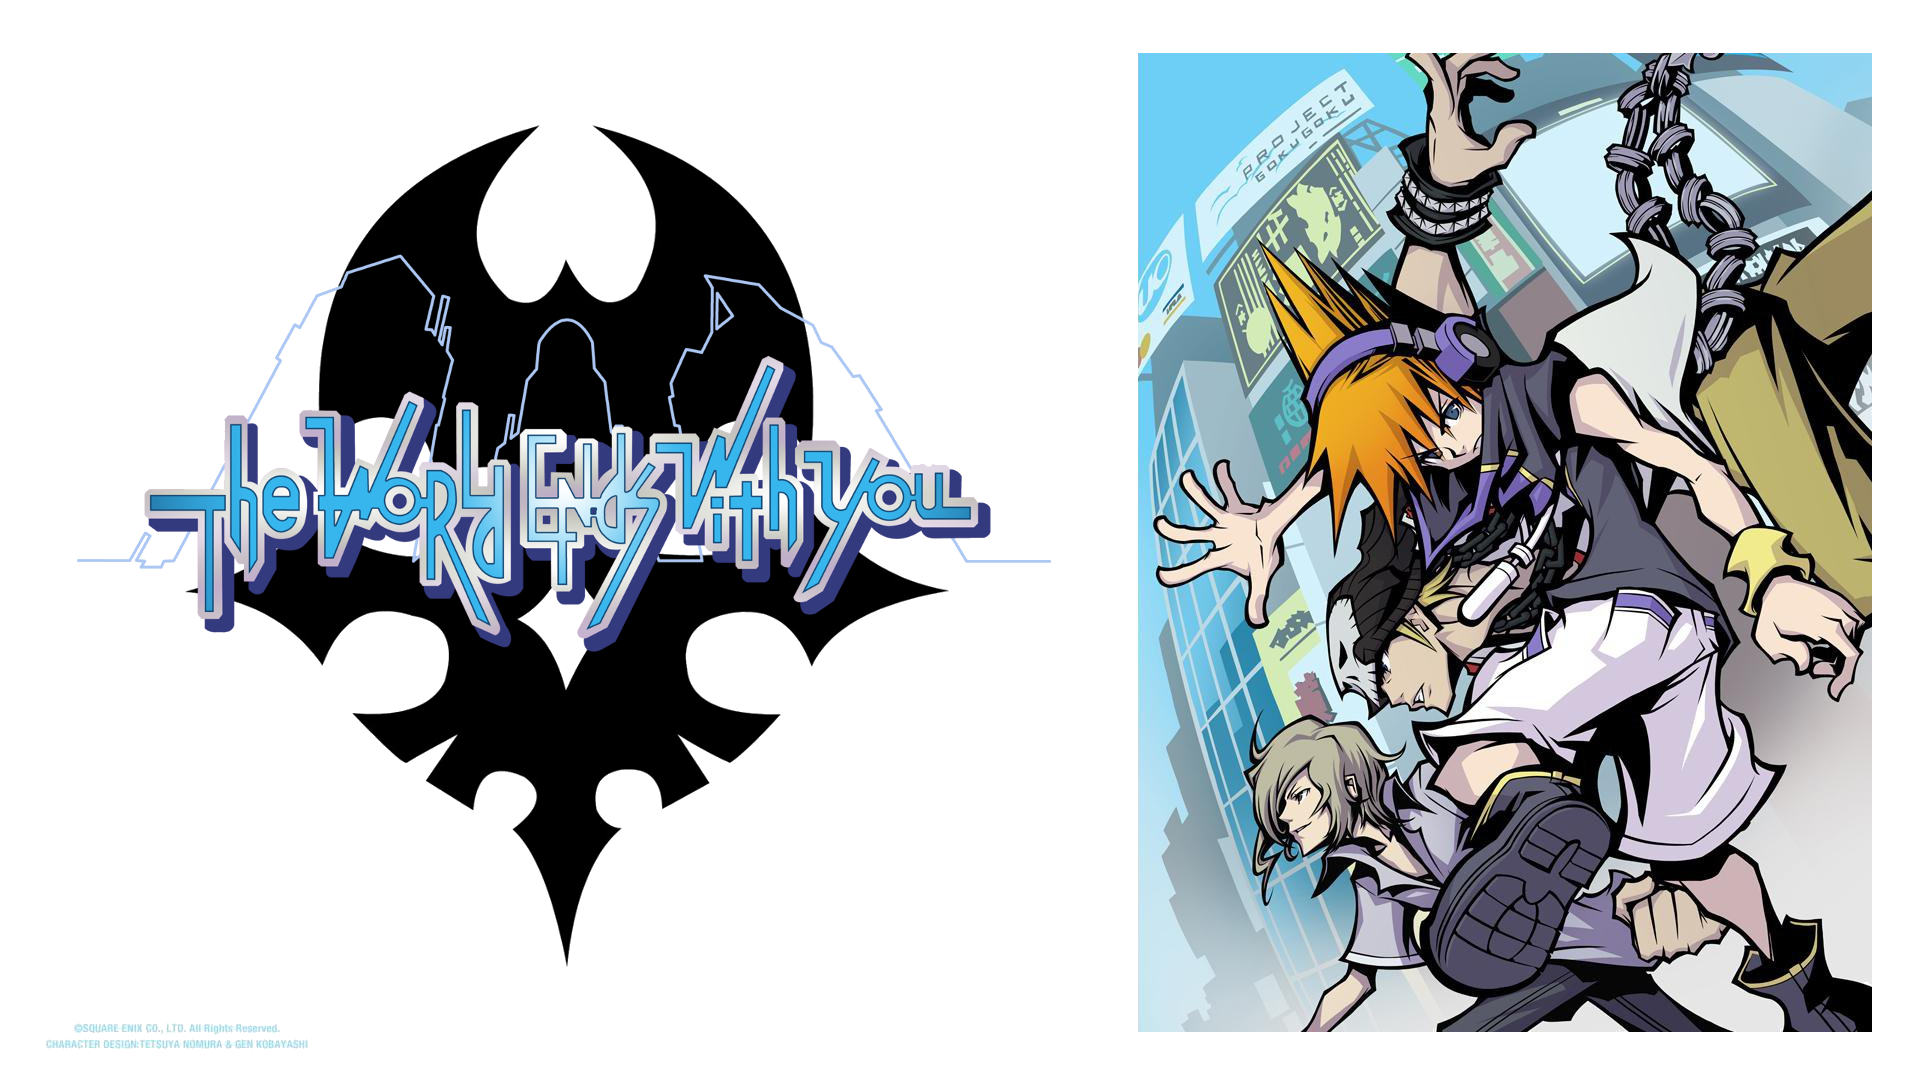 Imageremade - World Ends With You Skull , HD Wallpaper & Backgrounds